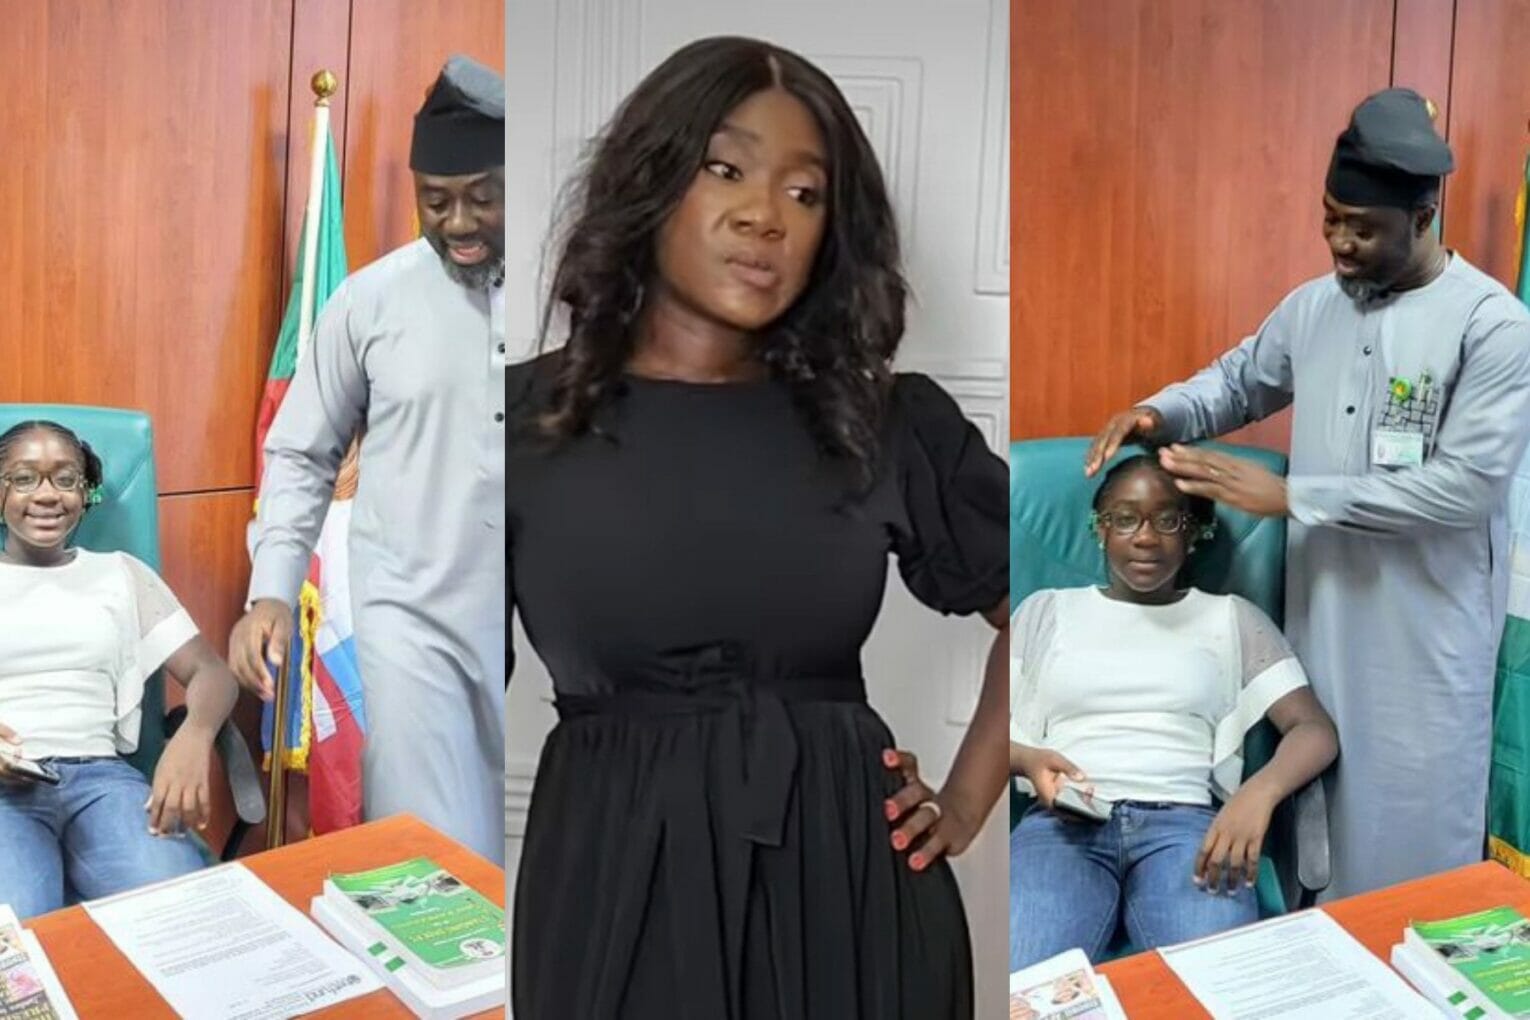 Mercy Johnson reacts as daughter storms husband's office